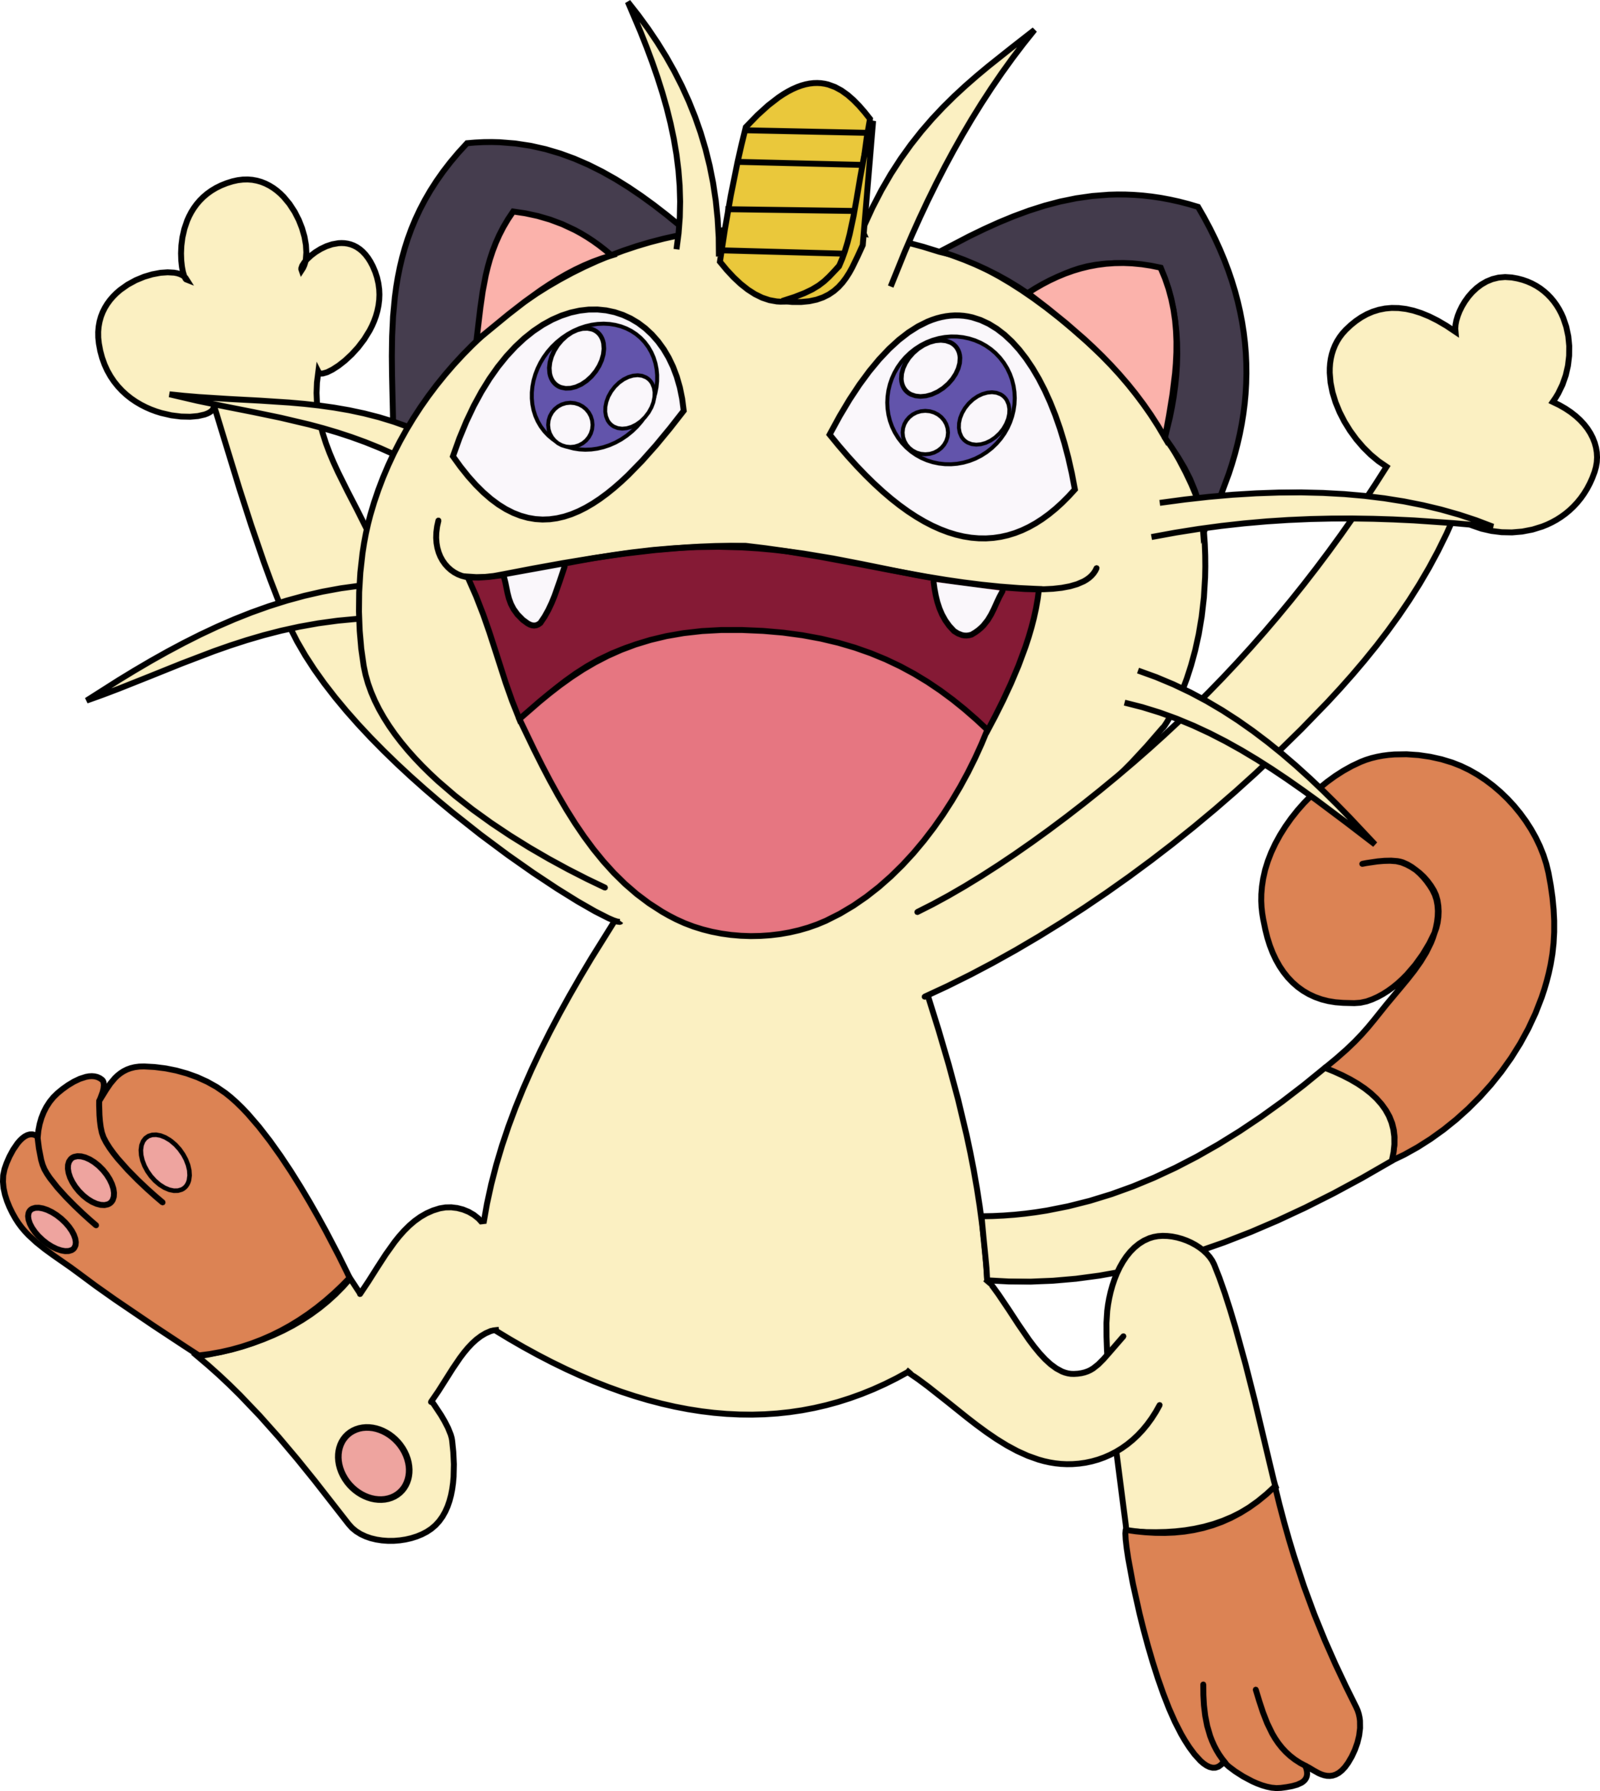 Post By Monoxide23 On Aug 4, 2014 At - Meowth Png (1600x1791)